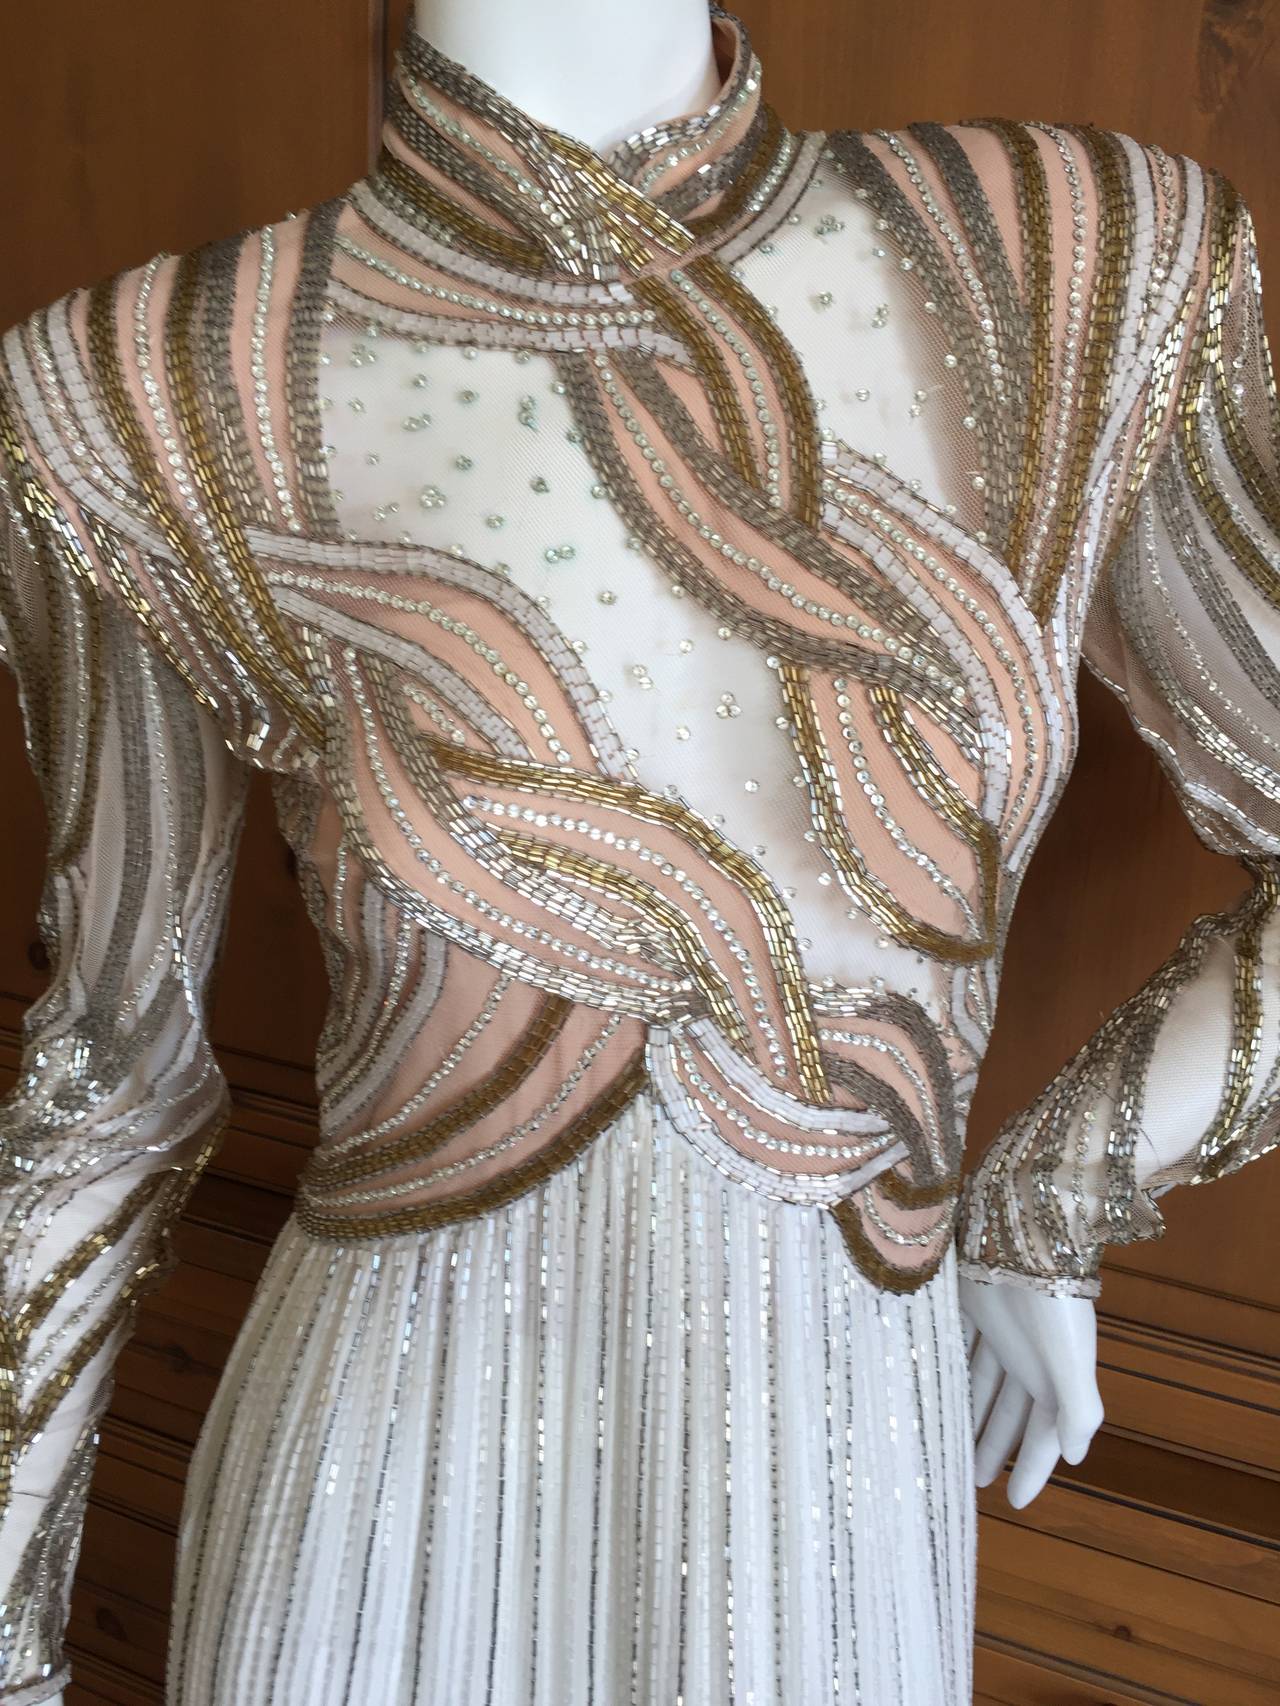 Bob Mackie Sheer Illusion 1970's Beaded Gown.
This is Mackie at his best, with sheer sections showing skin, and all the delicious beadwork in gold , silver and crystal.
I would estimate this at size 2-4 in todays sizing.
Bust 36